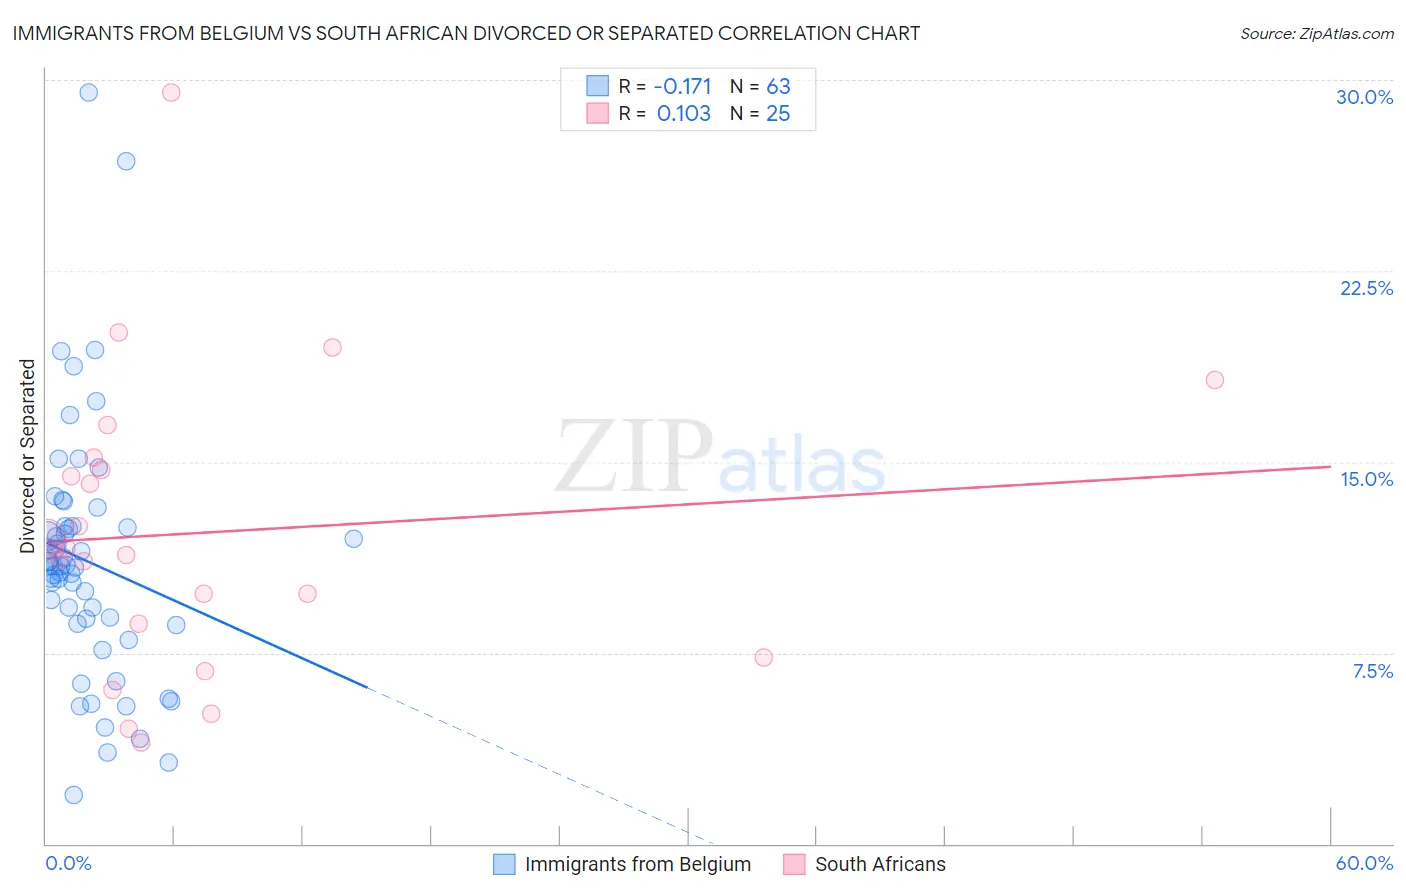 Immigrants from Belgium vs South African Divorced or Separated